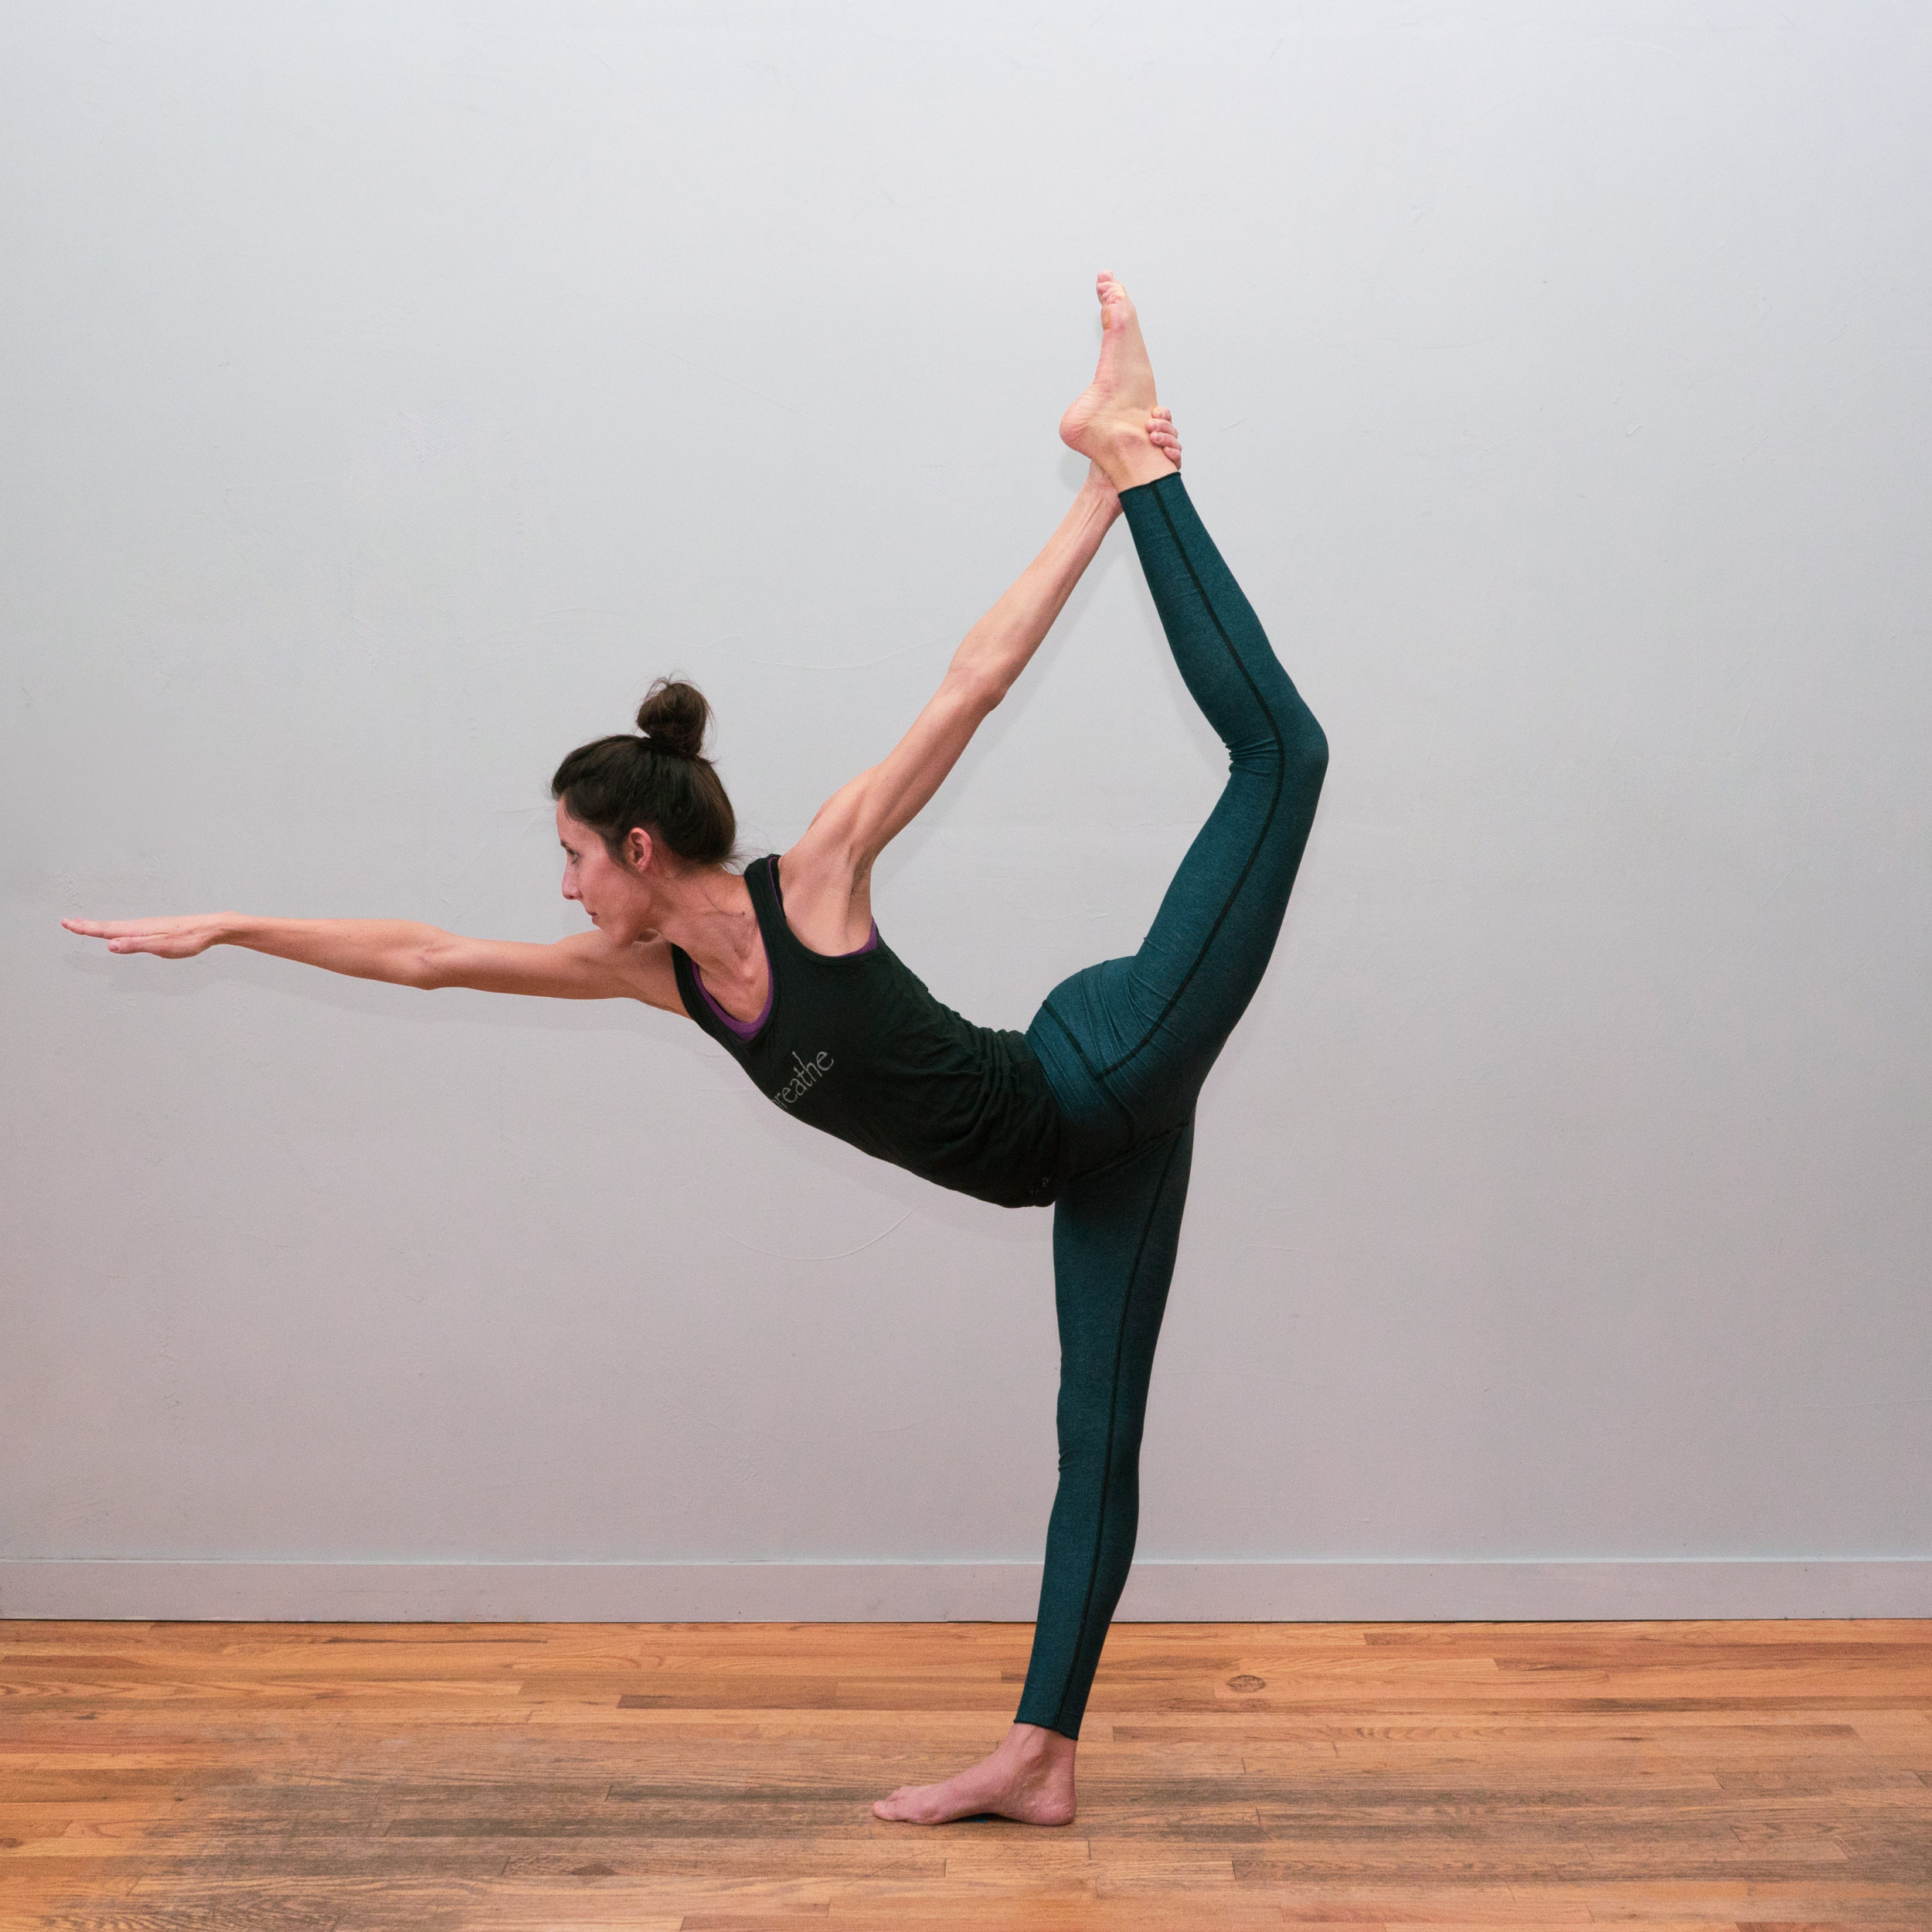 Why We fall out of Standing Bow Pulling | Bikram Wellness